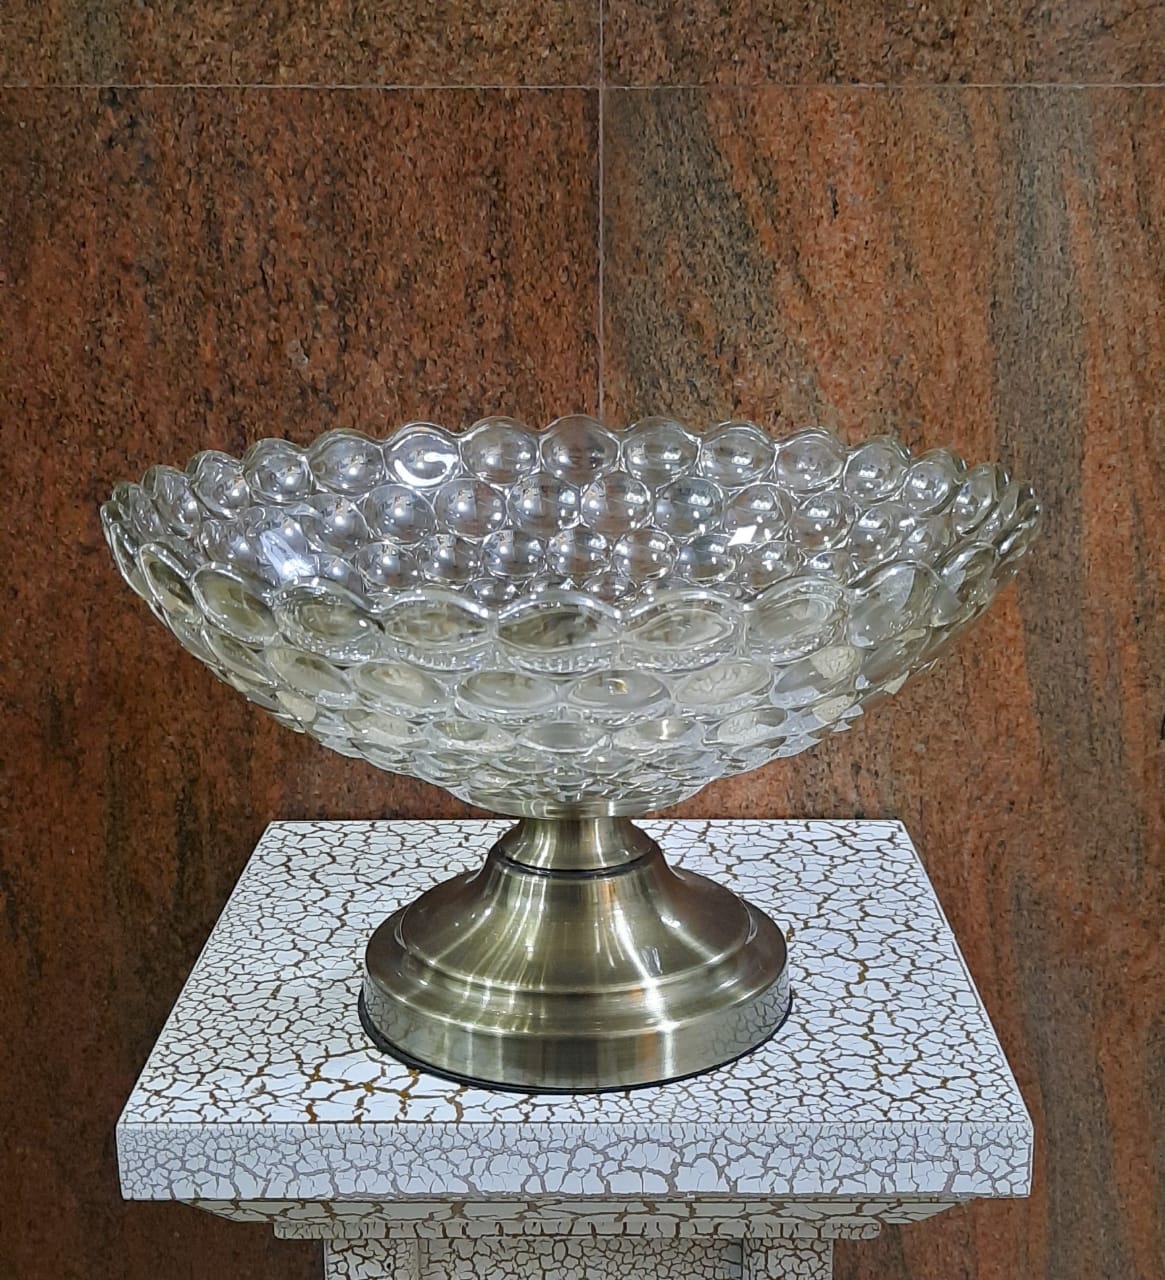 20cm Glass Oval Dish with Copper stand - Green Gardens Mihiliya (Pvt) Ltd